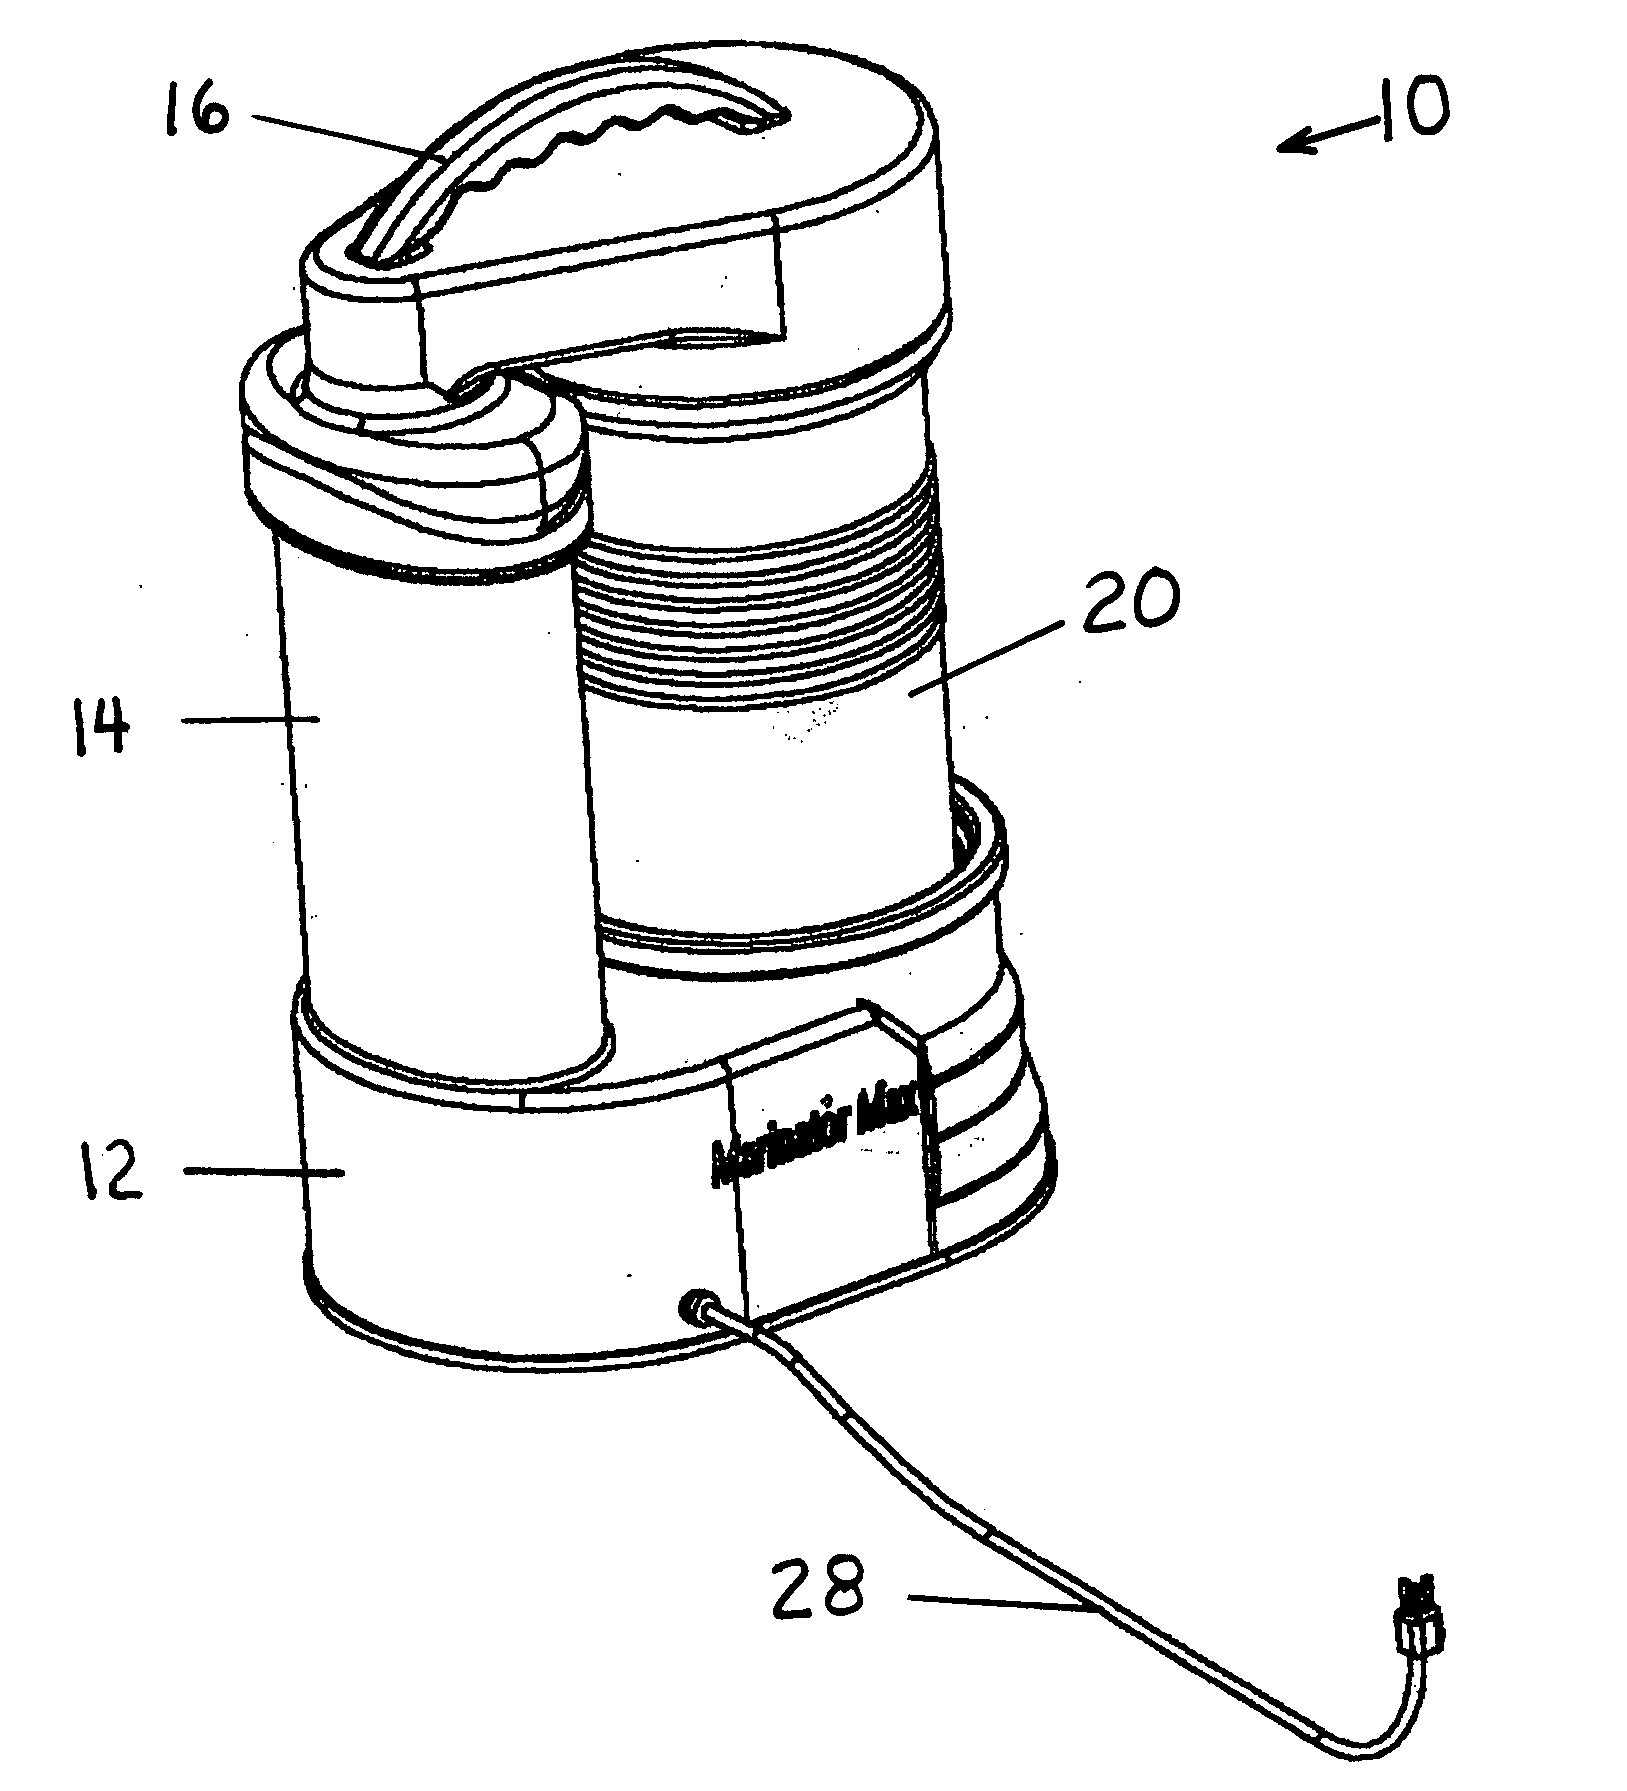 Apparatus for marinating foods